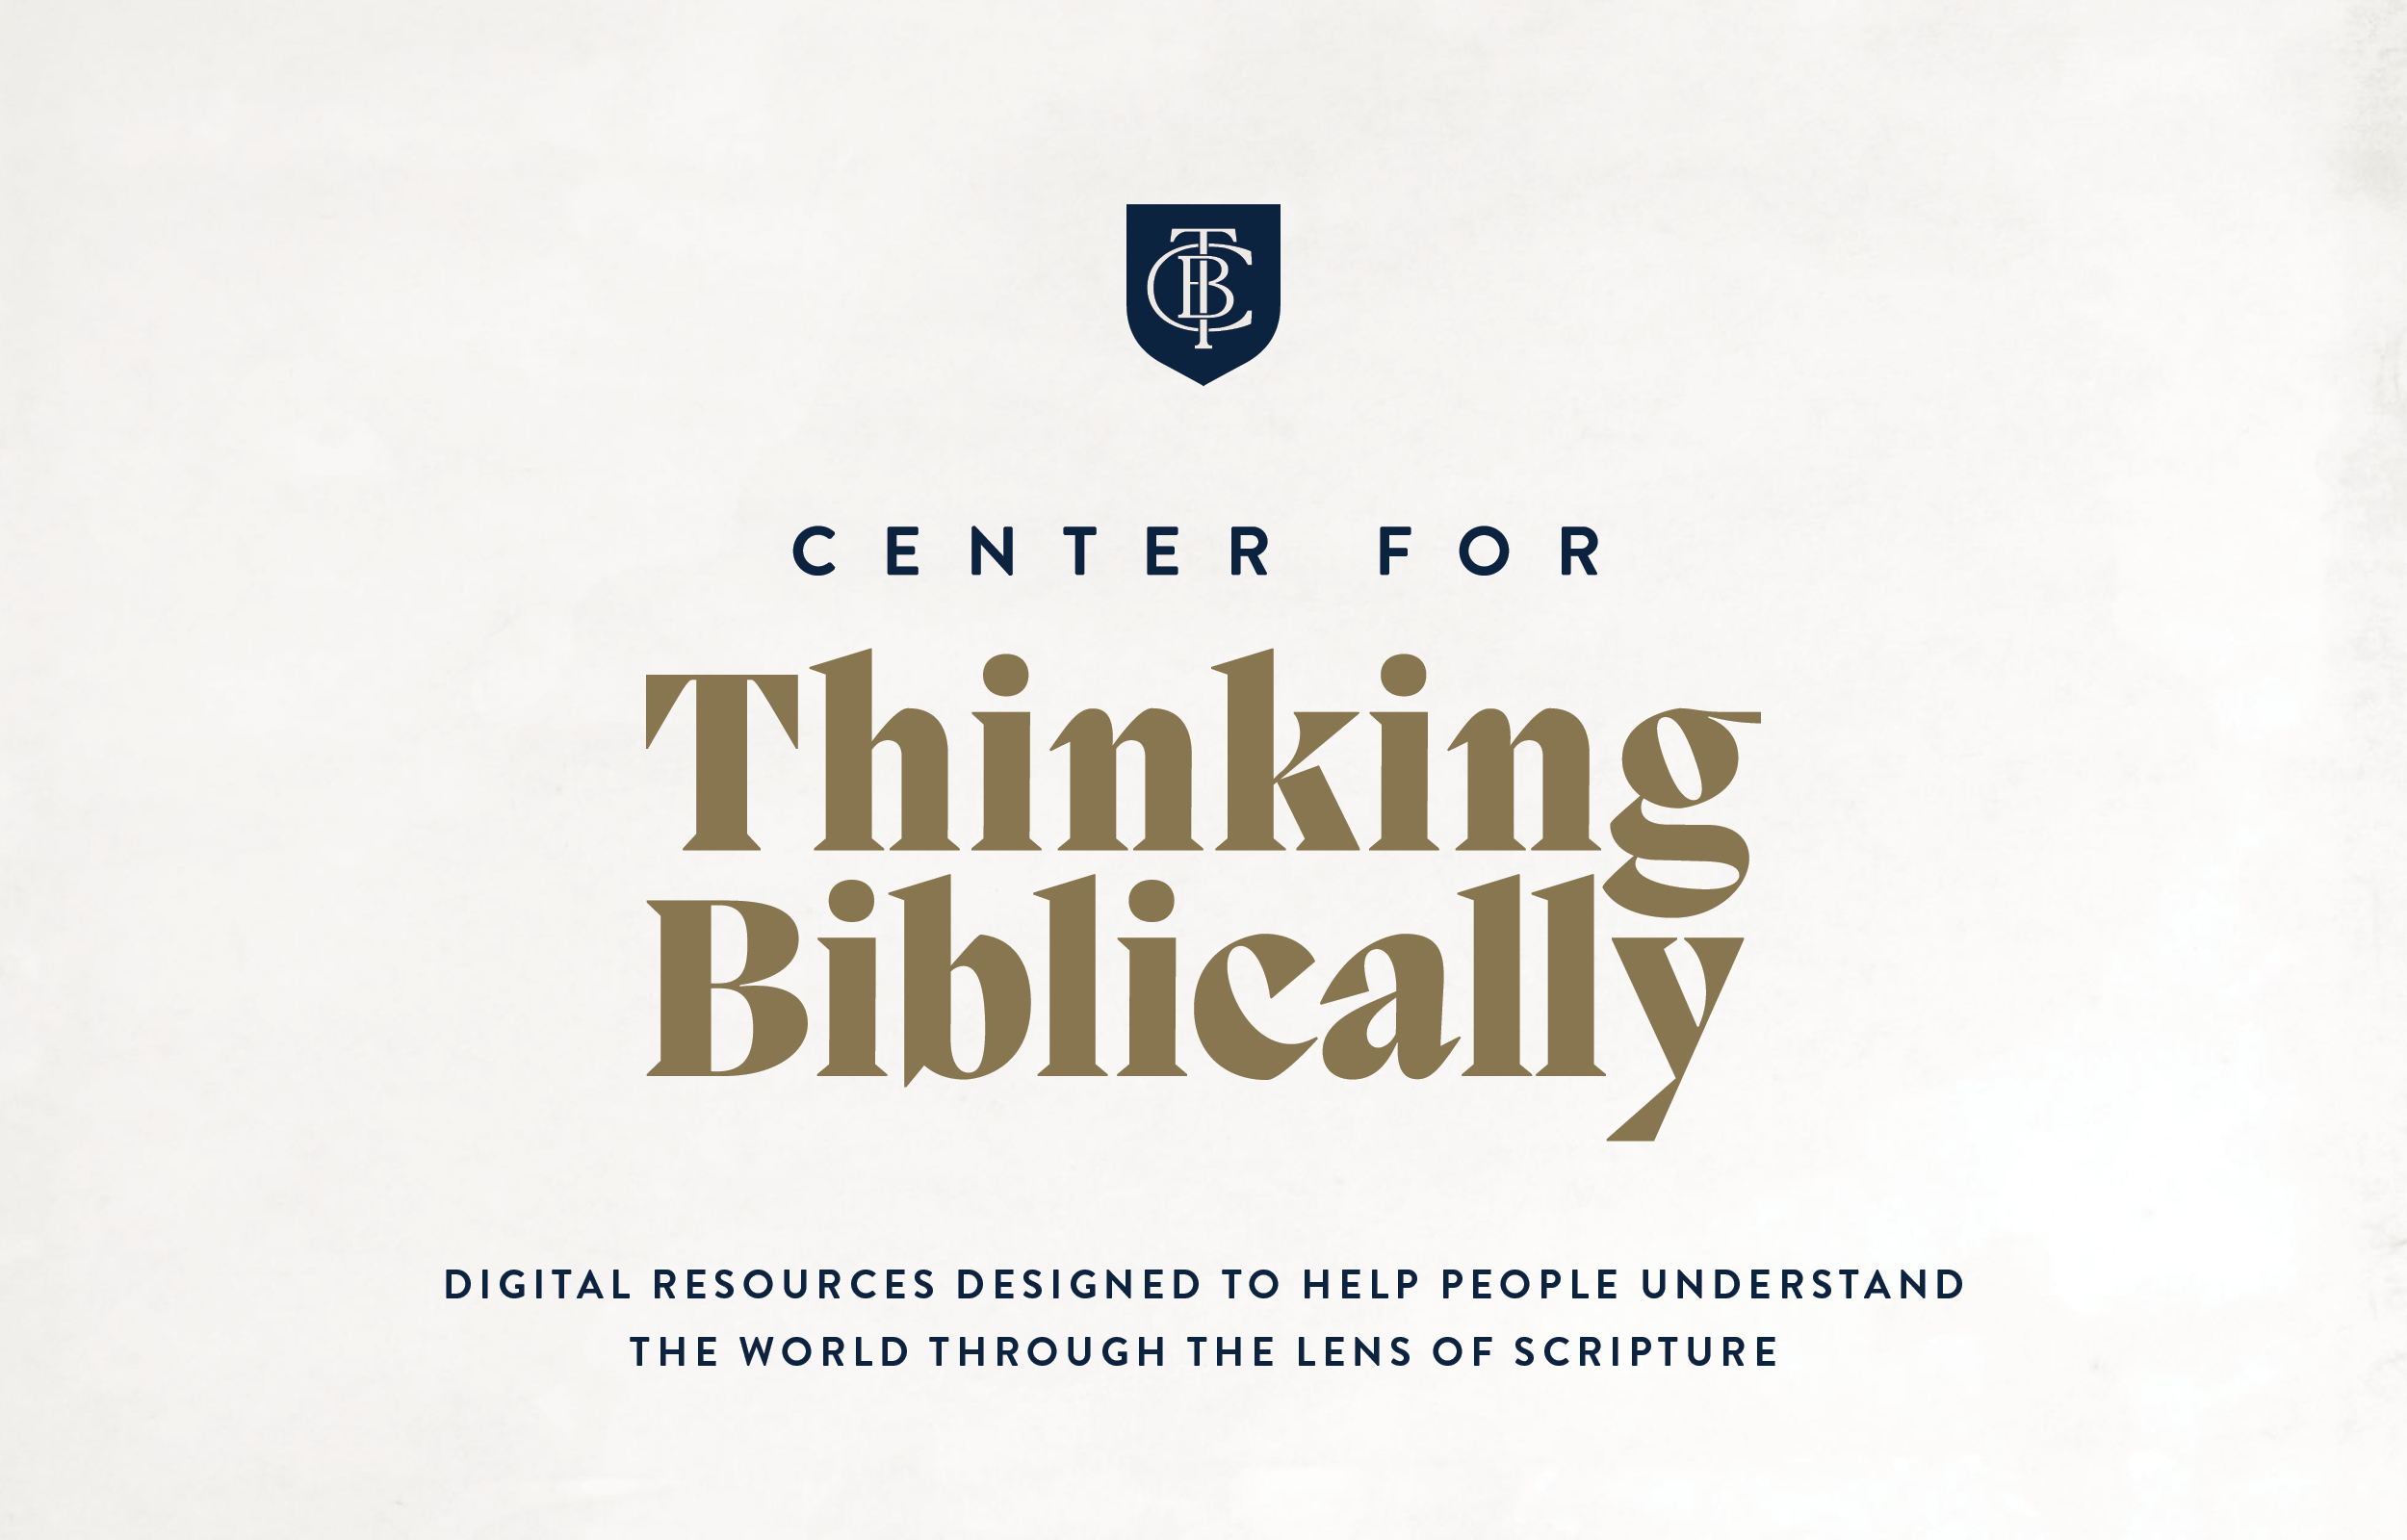 Center for Thinking Biblically image